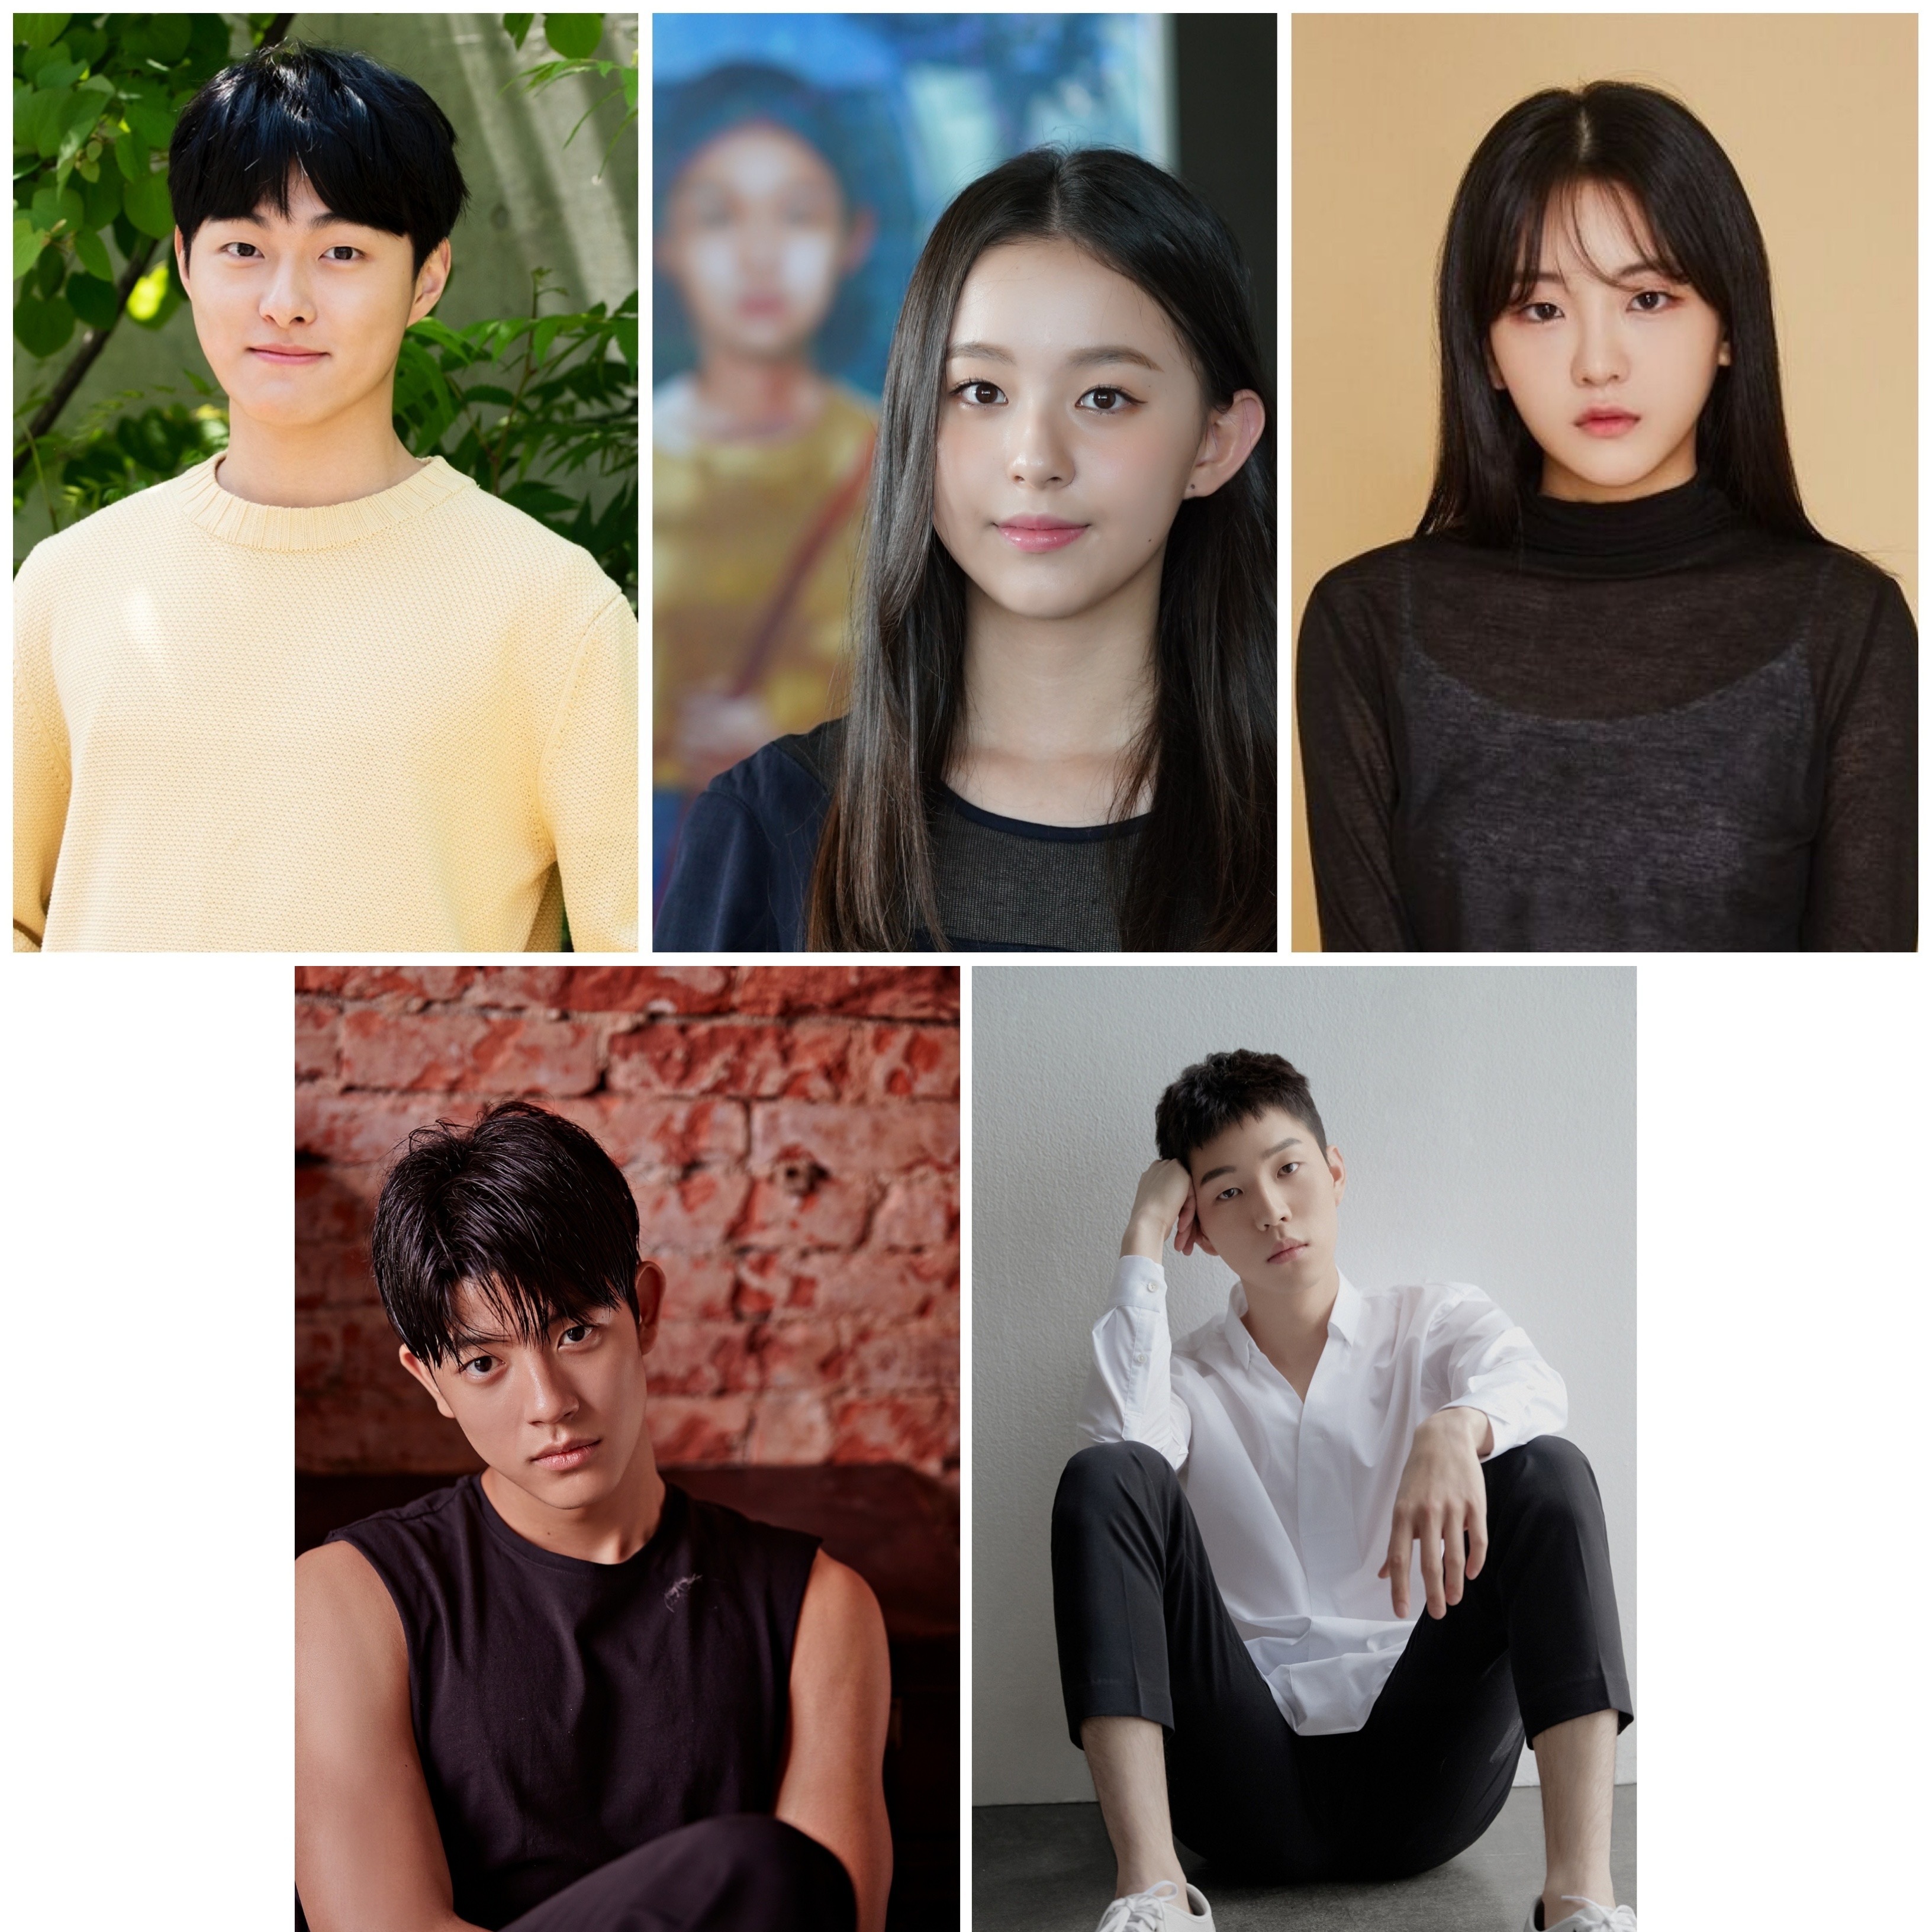 Netflix confirms casting for Korean high school zombie series, 'All of us are Dead'